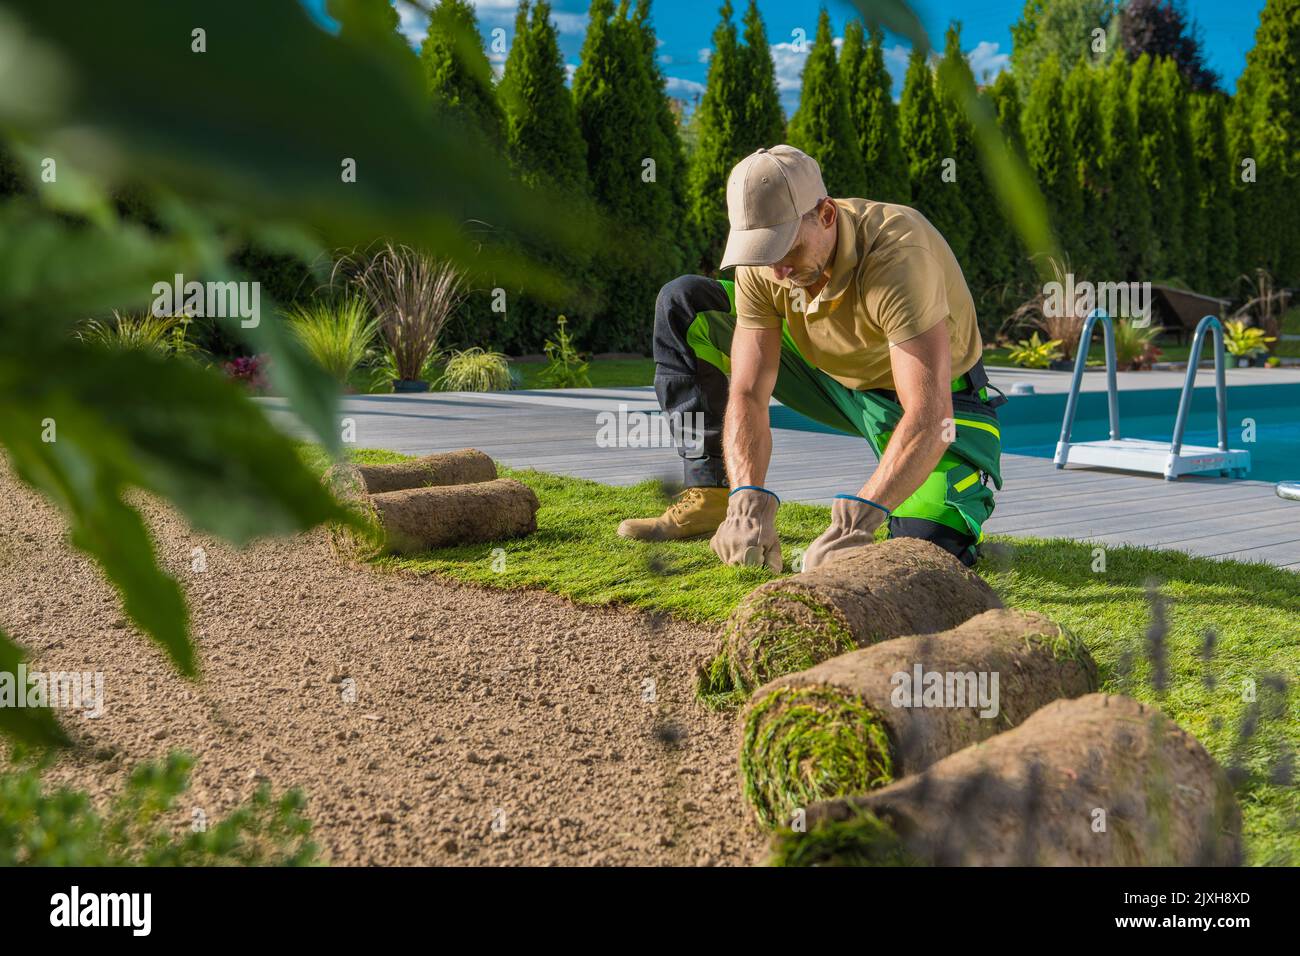 Rolls of Natural Grass Turfs Installed by Professional Landscaper. Building a Lawn Around the Swimming Pool. Stock Photo